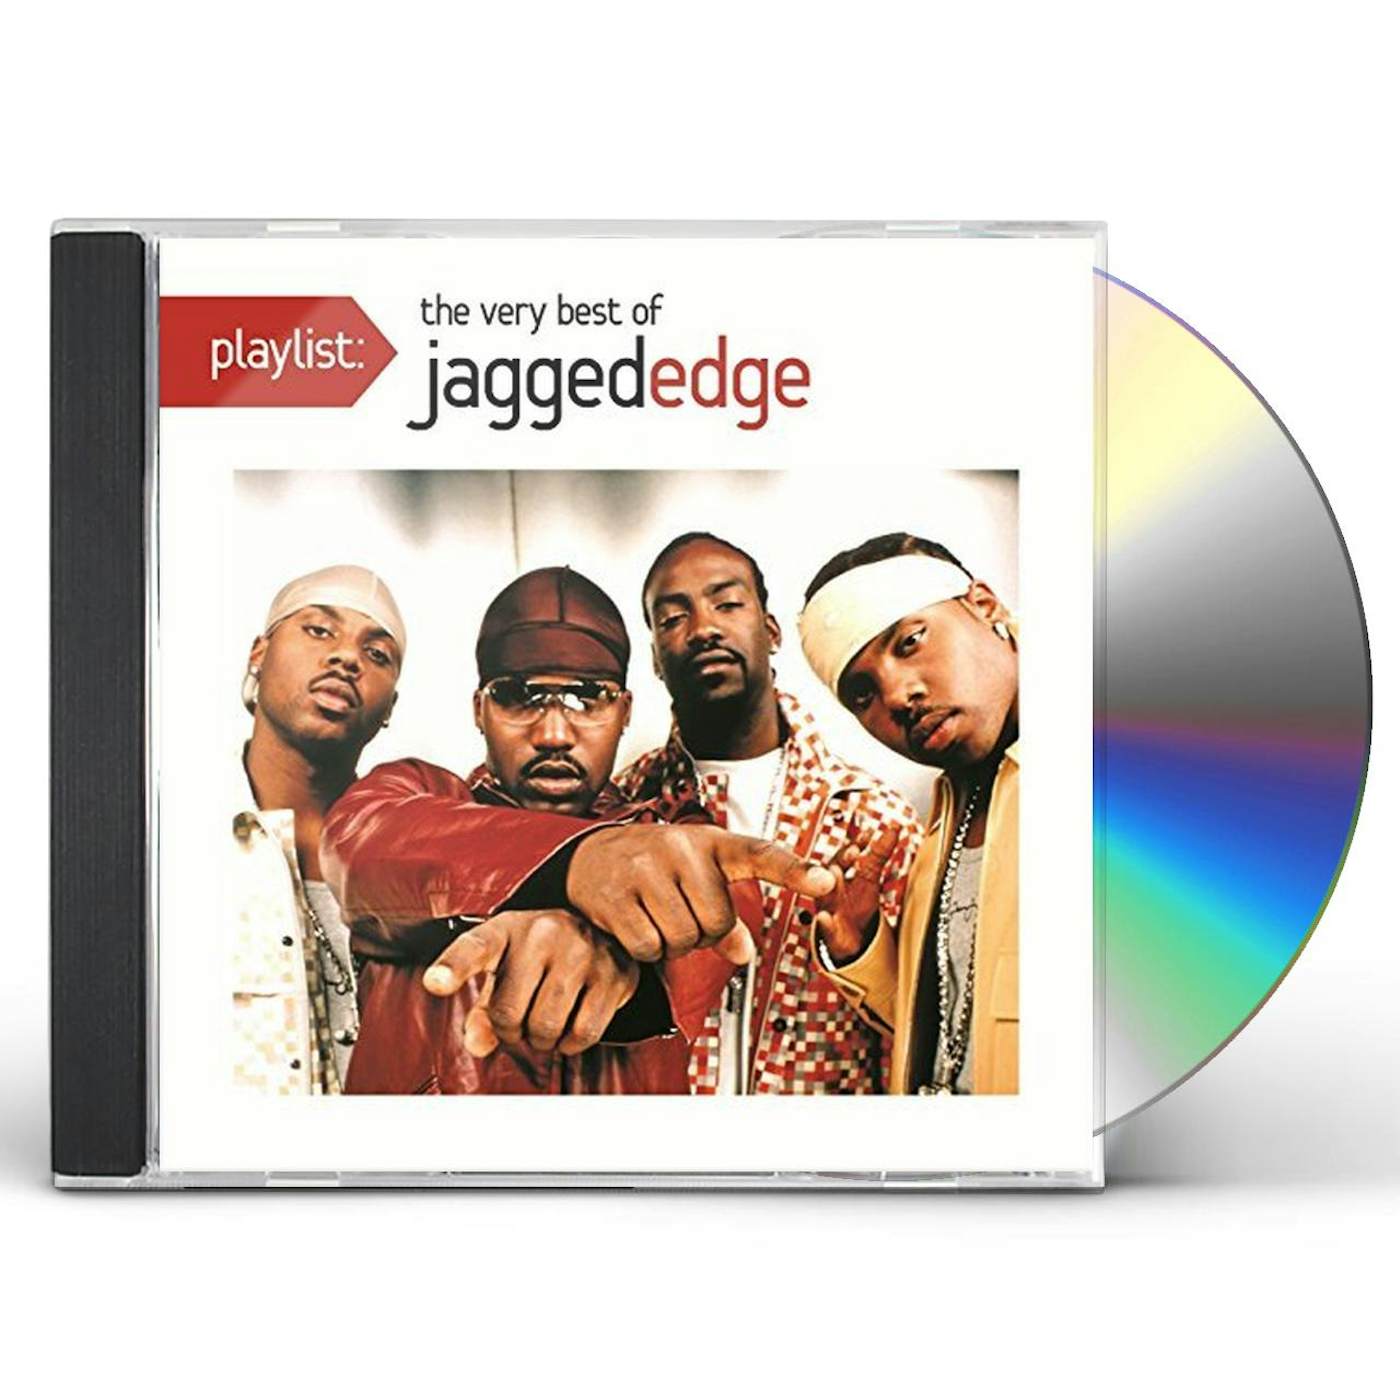 PLAYLIST: THE VERY BEST OF JAGGED EDGE CD